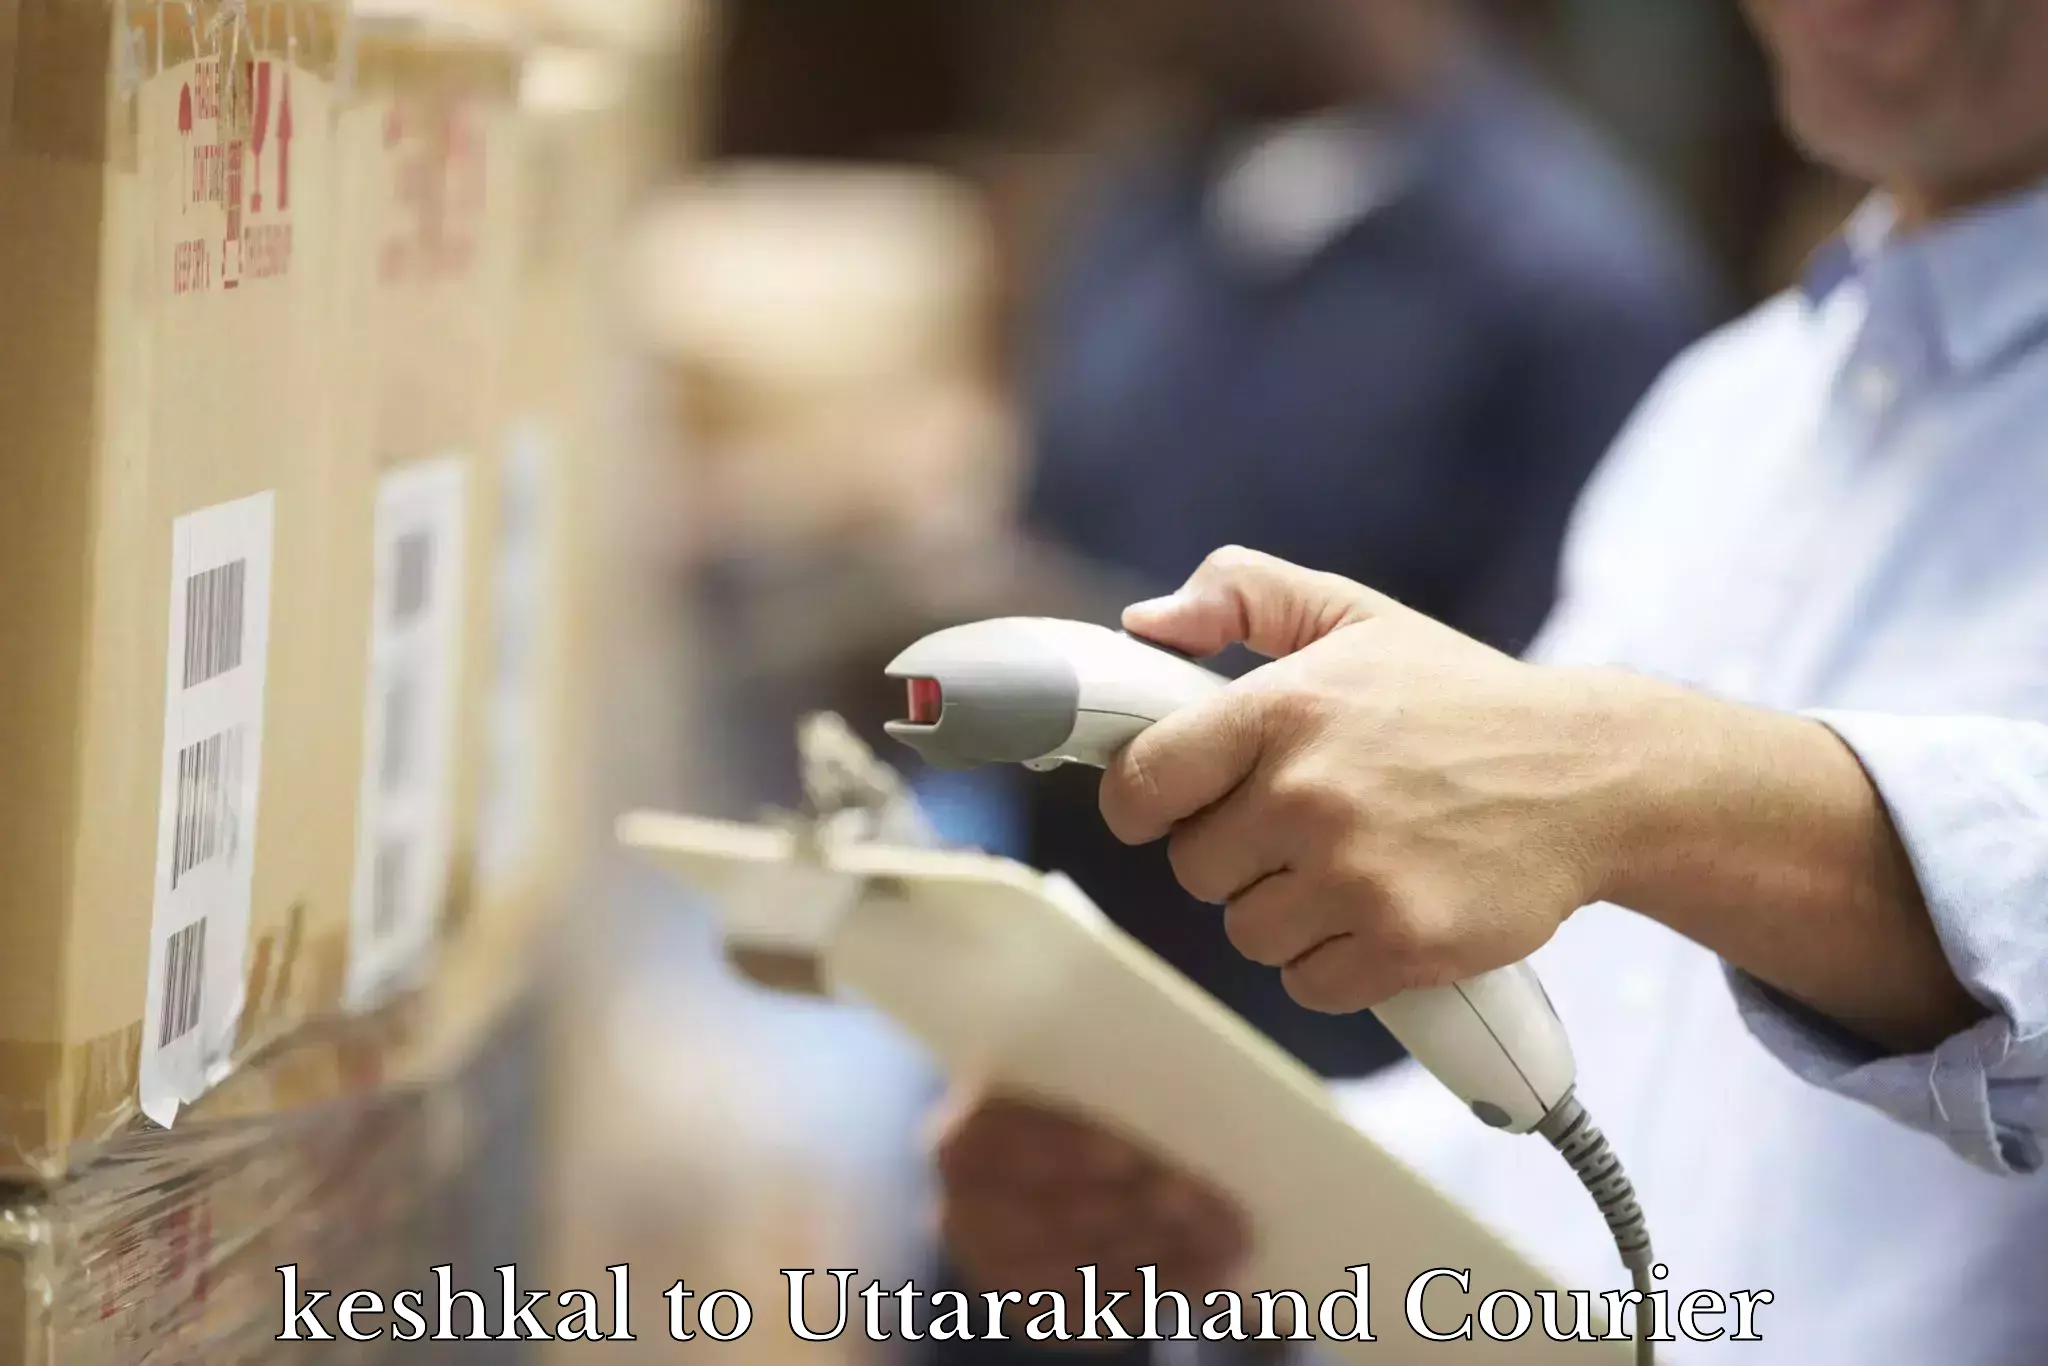 Efficient package consolidation keshkal to Dehradun